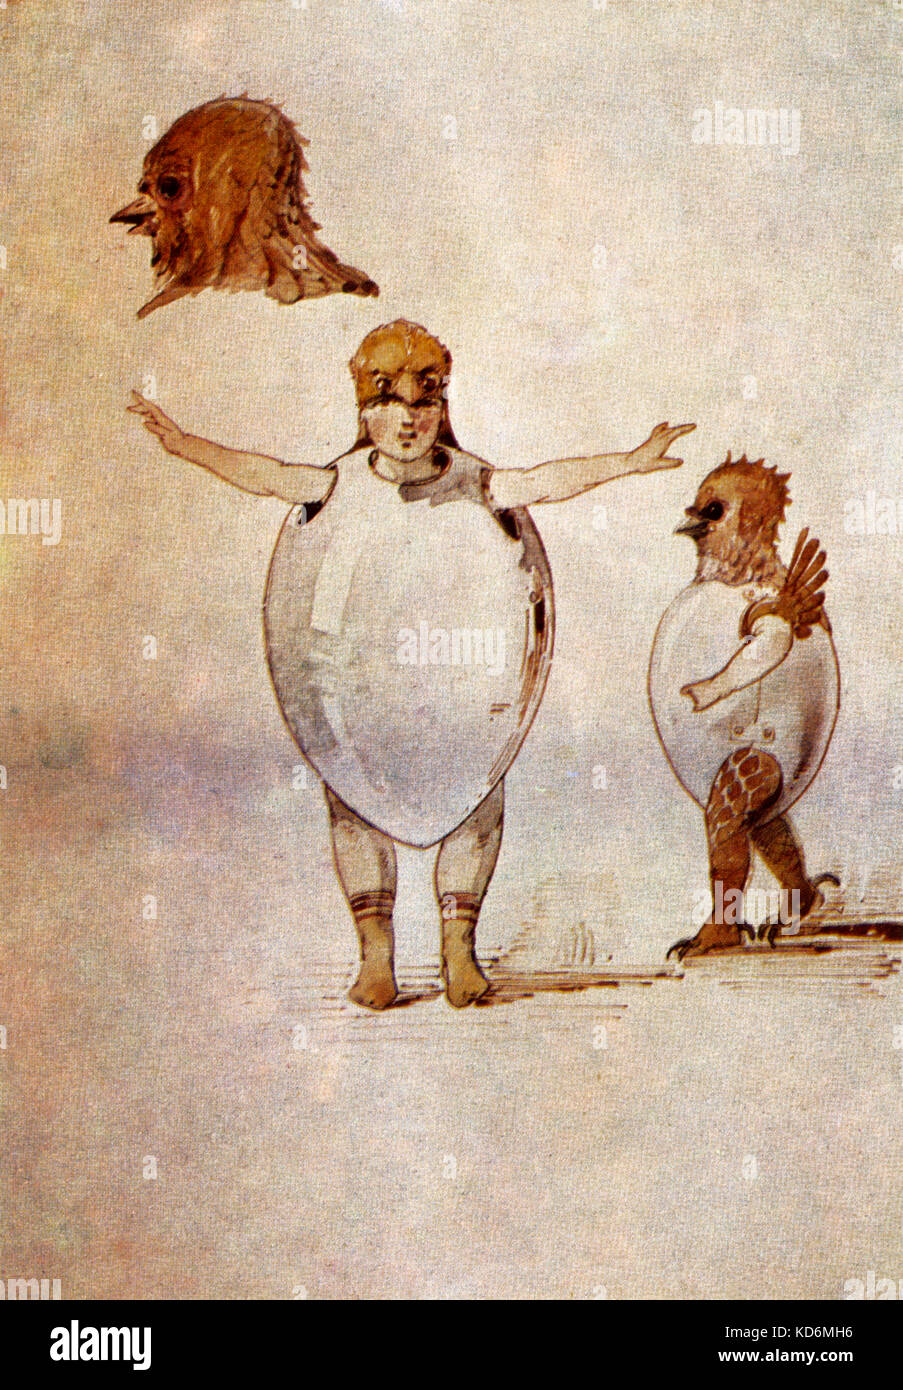 Victor Hartmann's  costume sketch for Ballet of Unhatched Chicks, Ballets des poussins dans leurs coques part of Mussorgsky 's composition Pictures at an Exhibition.  Inspired by memorial exhibition of his friend's work. Stock Photo